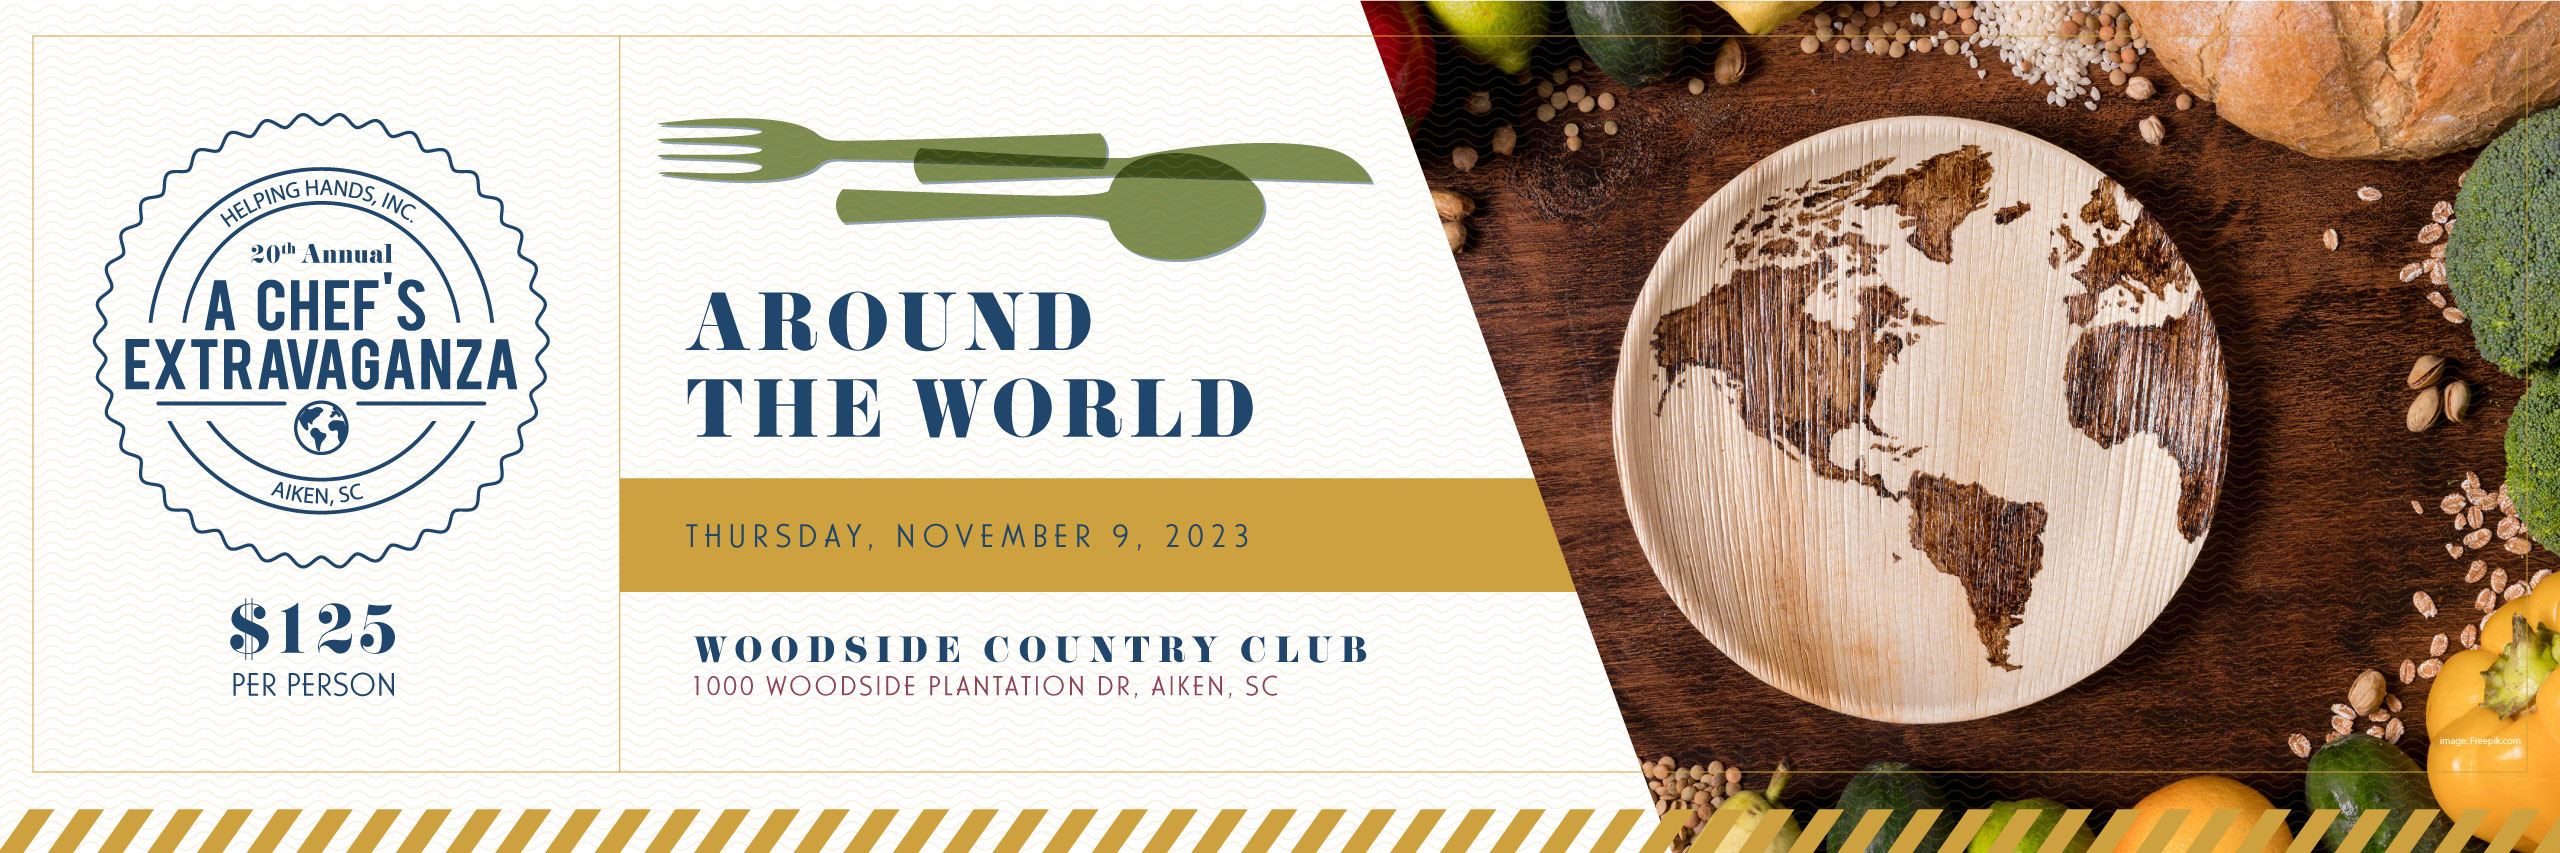 A Chef's Extravaganza, Thursday, November 9, 2023, Woodside Country Club